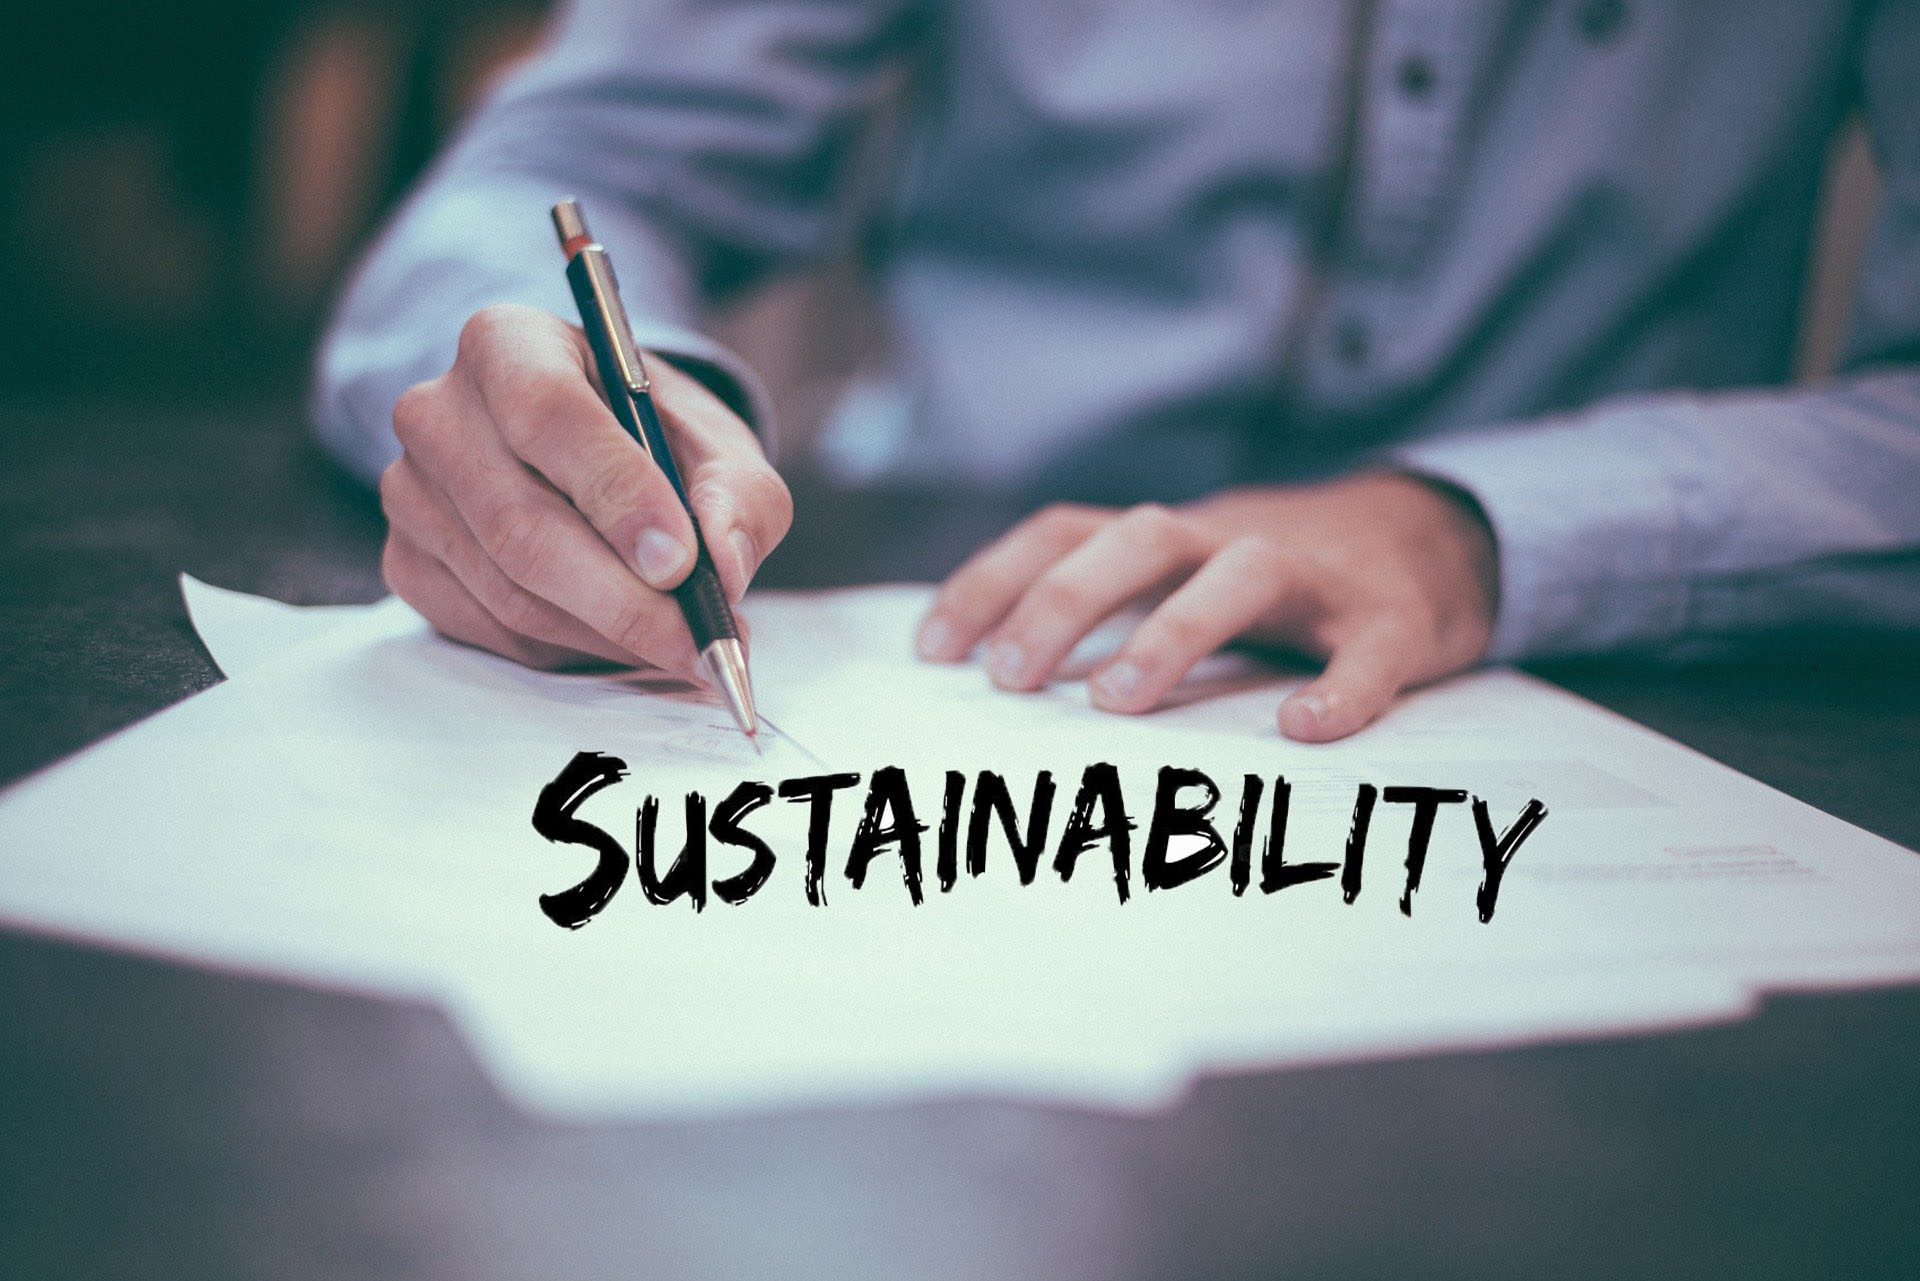 Sustainability: Definition and Why Is It Important with Practical Recommendations